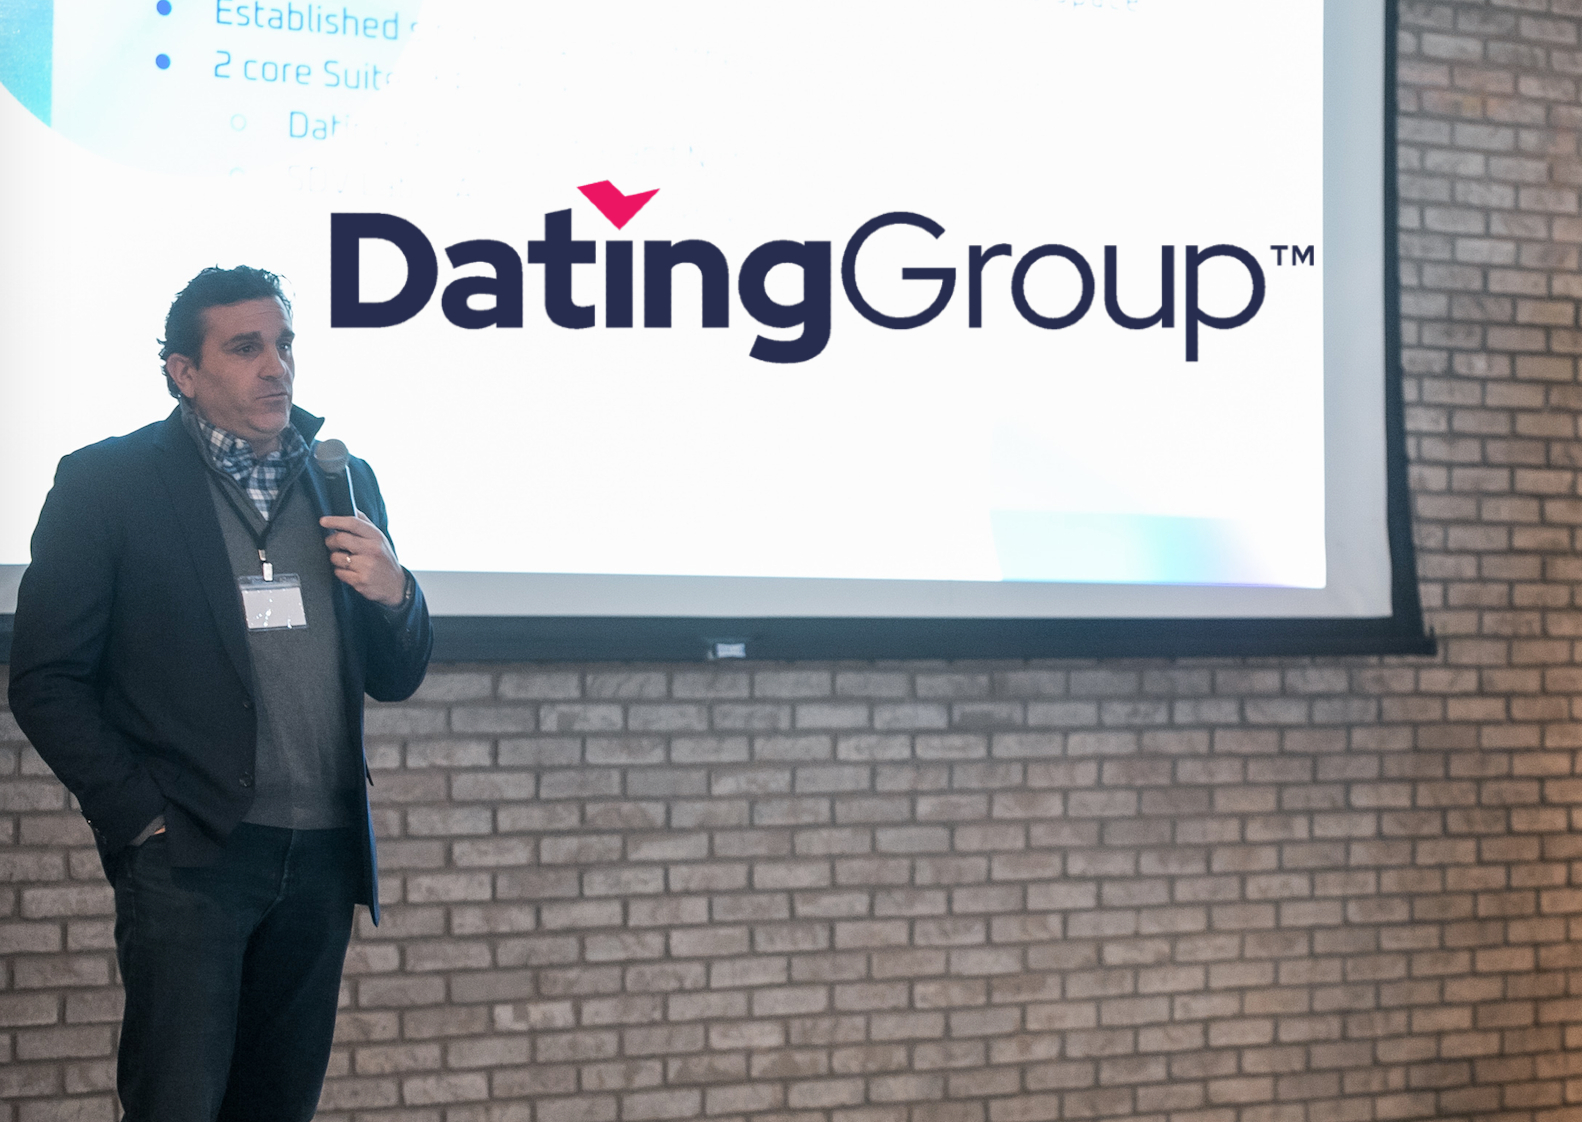 Dating Group Launches Focus On Digital Intimacy And Virtual Dating Platforms